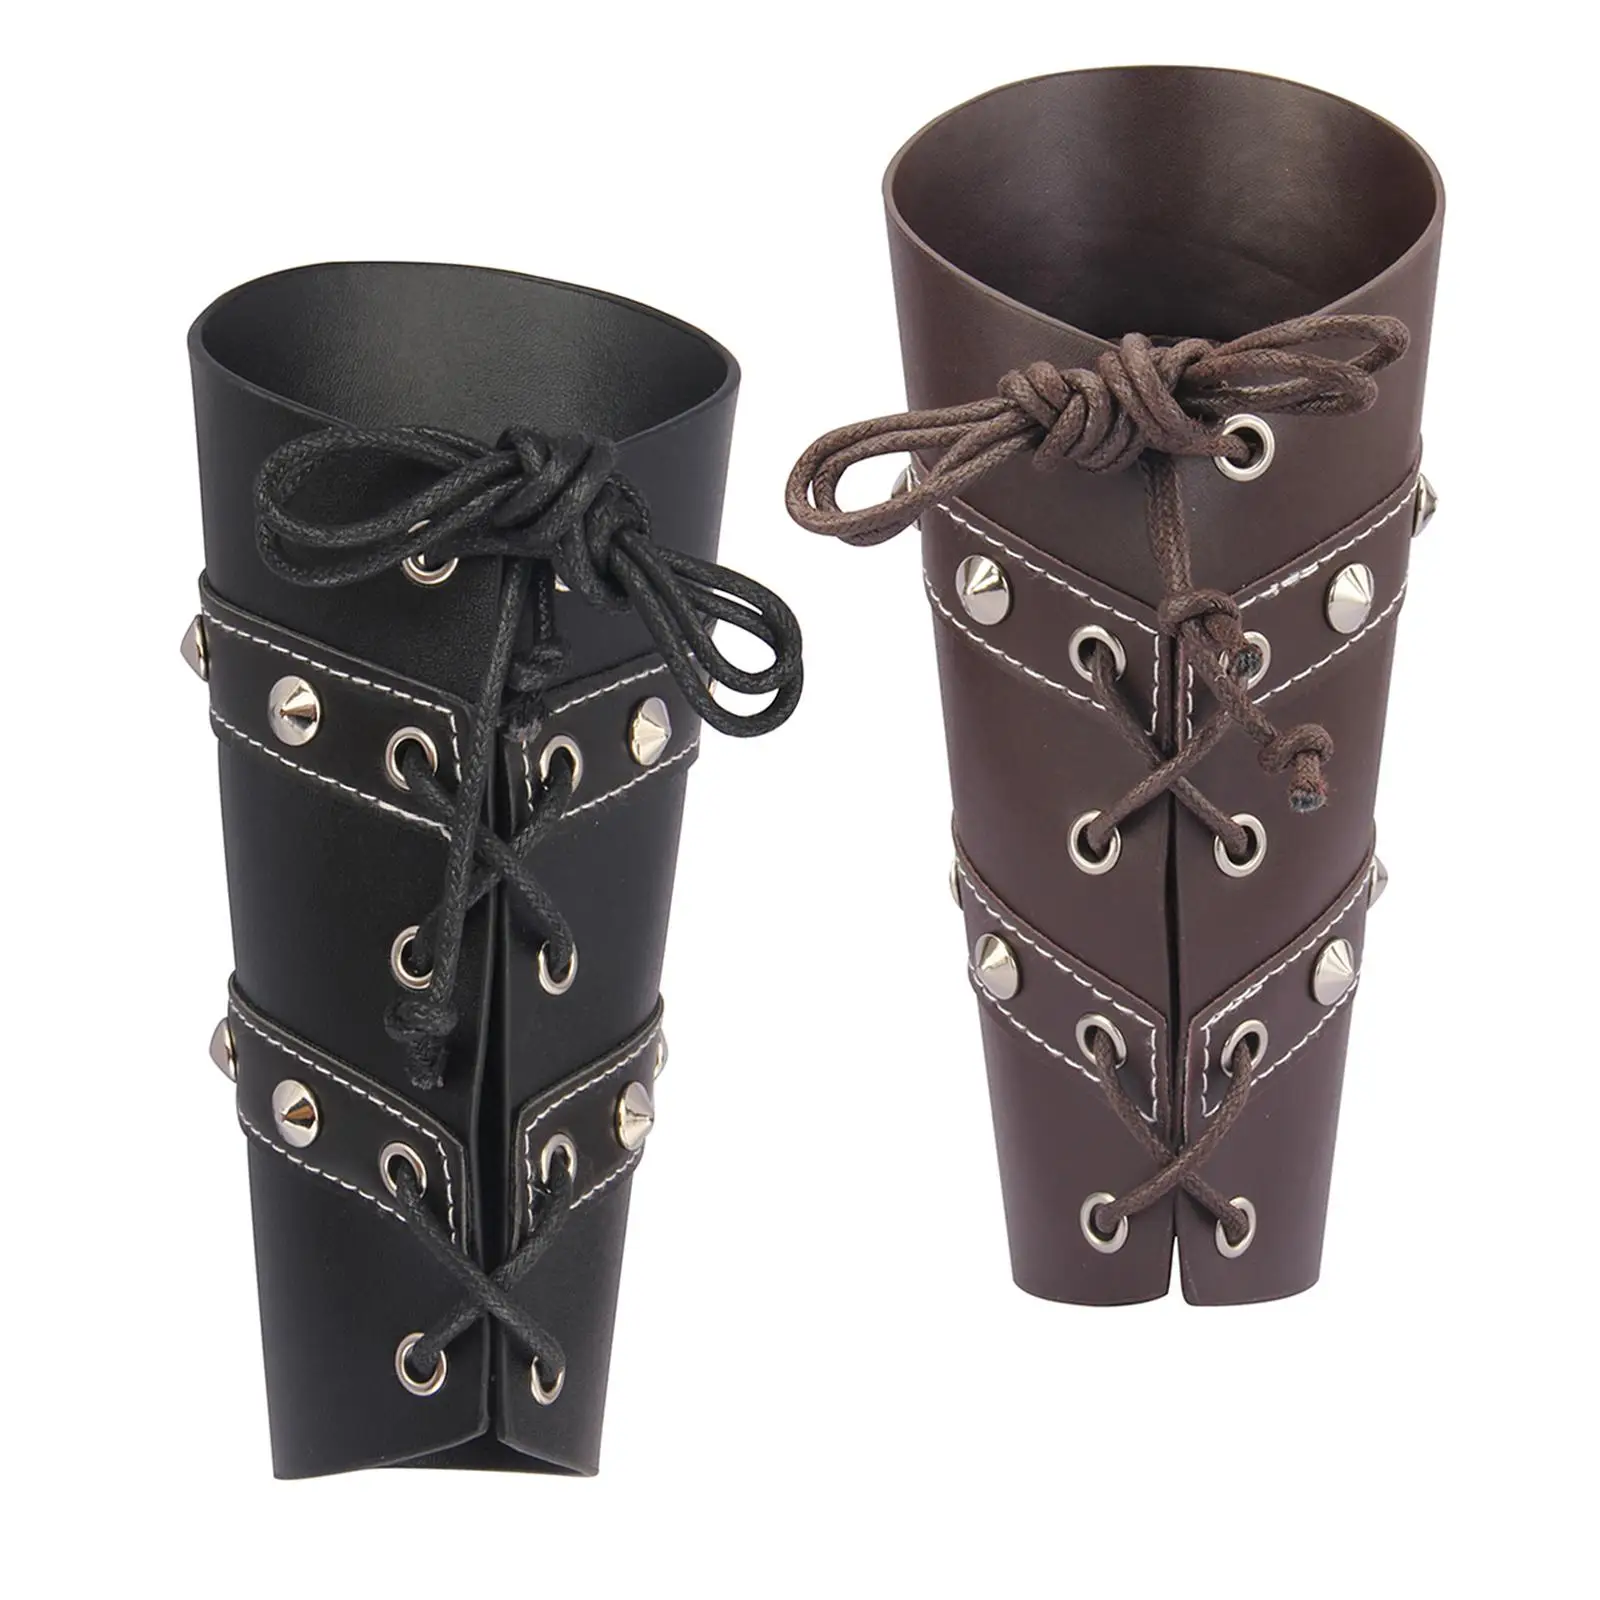 PU Leather Arm Cuff Gothic Medieval Arm Guards Protection for Men Women Role Playing Weddings Halloween Party Graduations